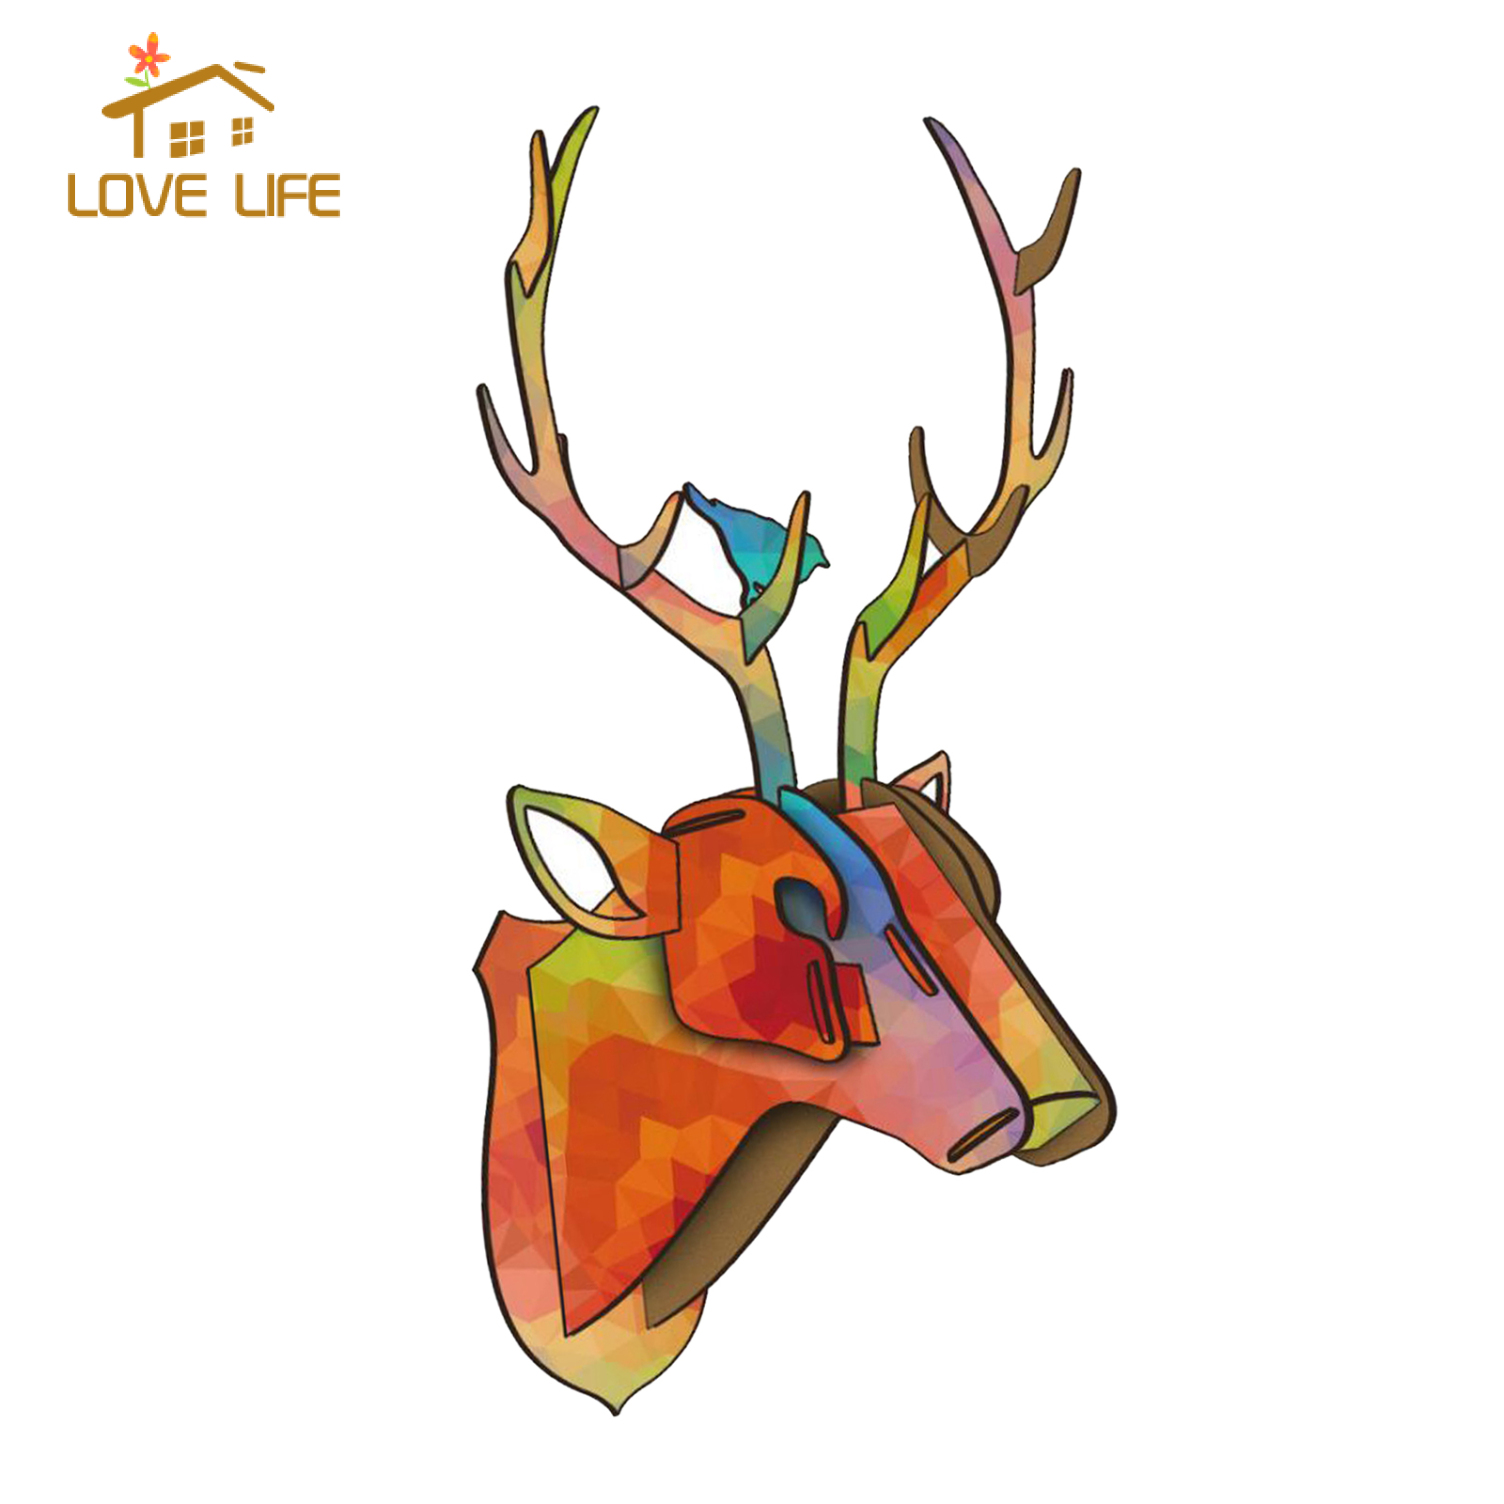 [whfashion]3D Puzzle Trophy Animal Head Wall Deer Sculpture Art for Office Home Decor A